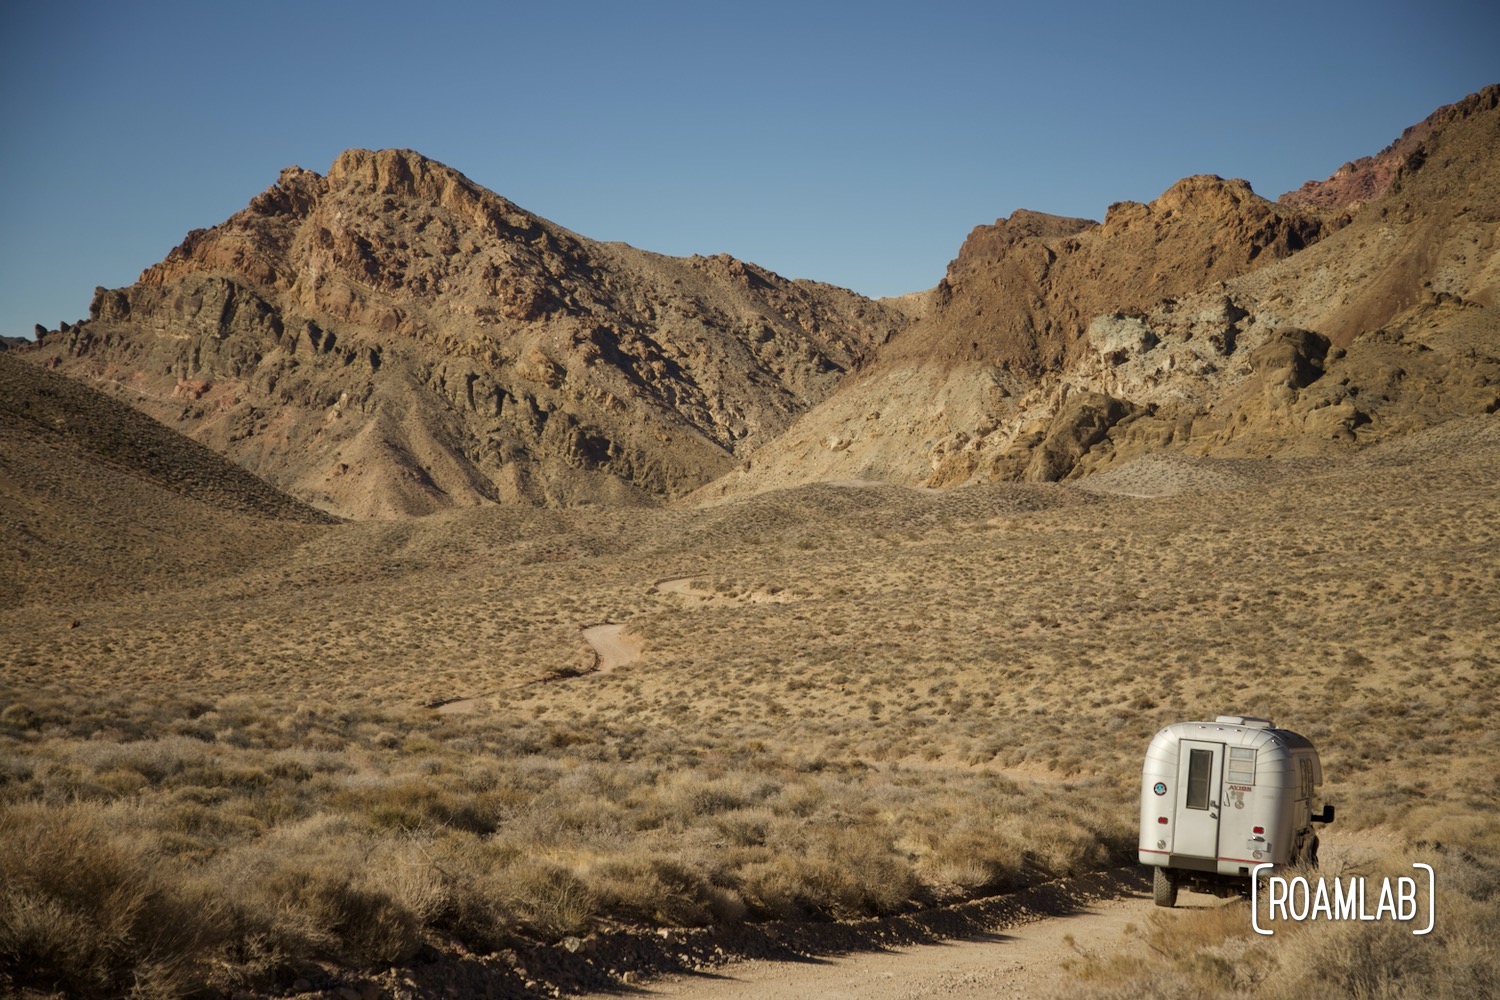 1970 Avion C11 truck camper following the dirt Titus Canyon Road in Death Valley National Park, California.